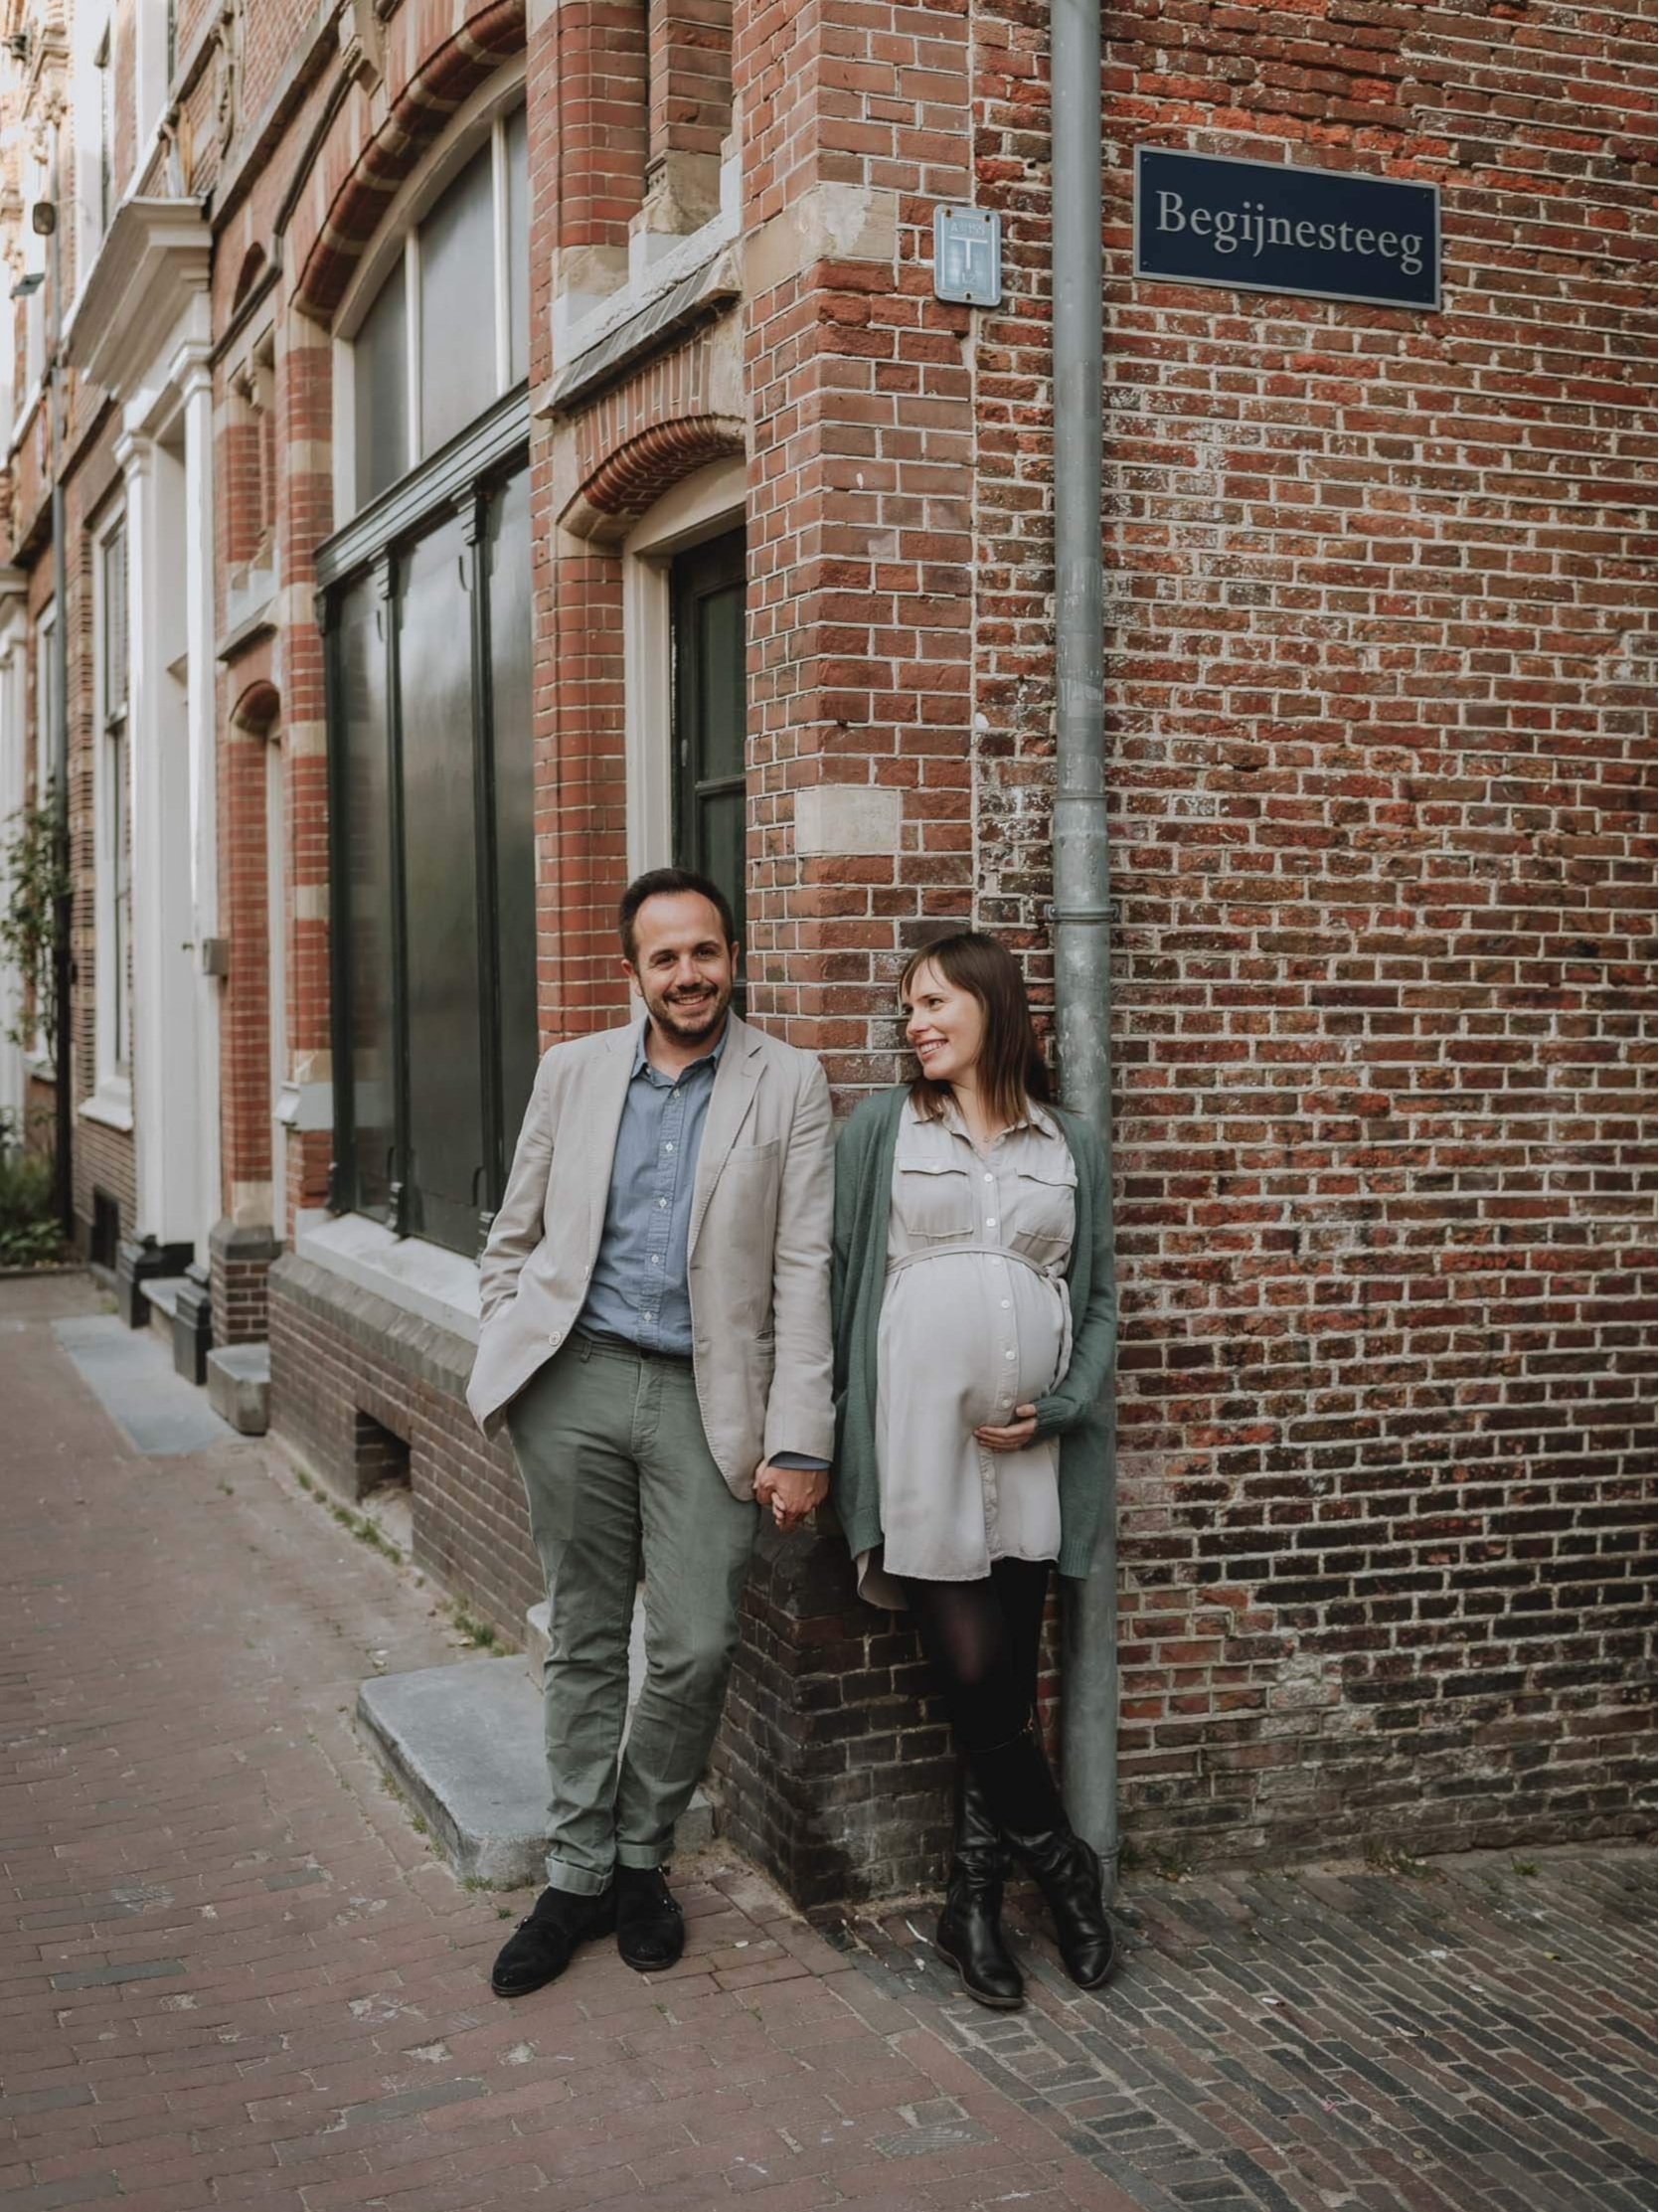 Maternity photoshoot in Haarlem by Vicky McLachlan Photography | David + Sofia_2